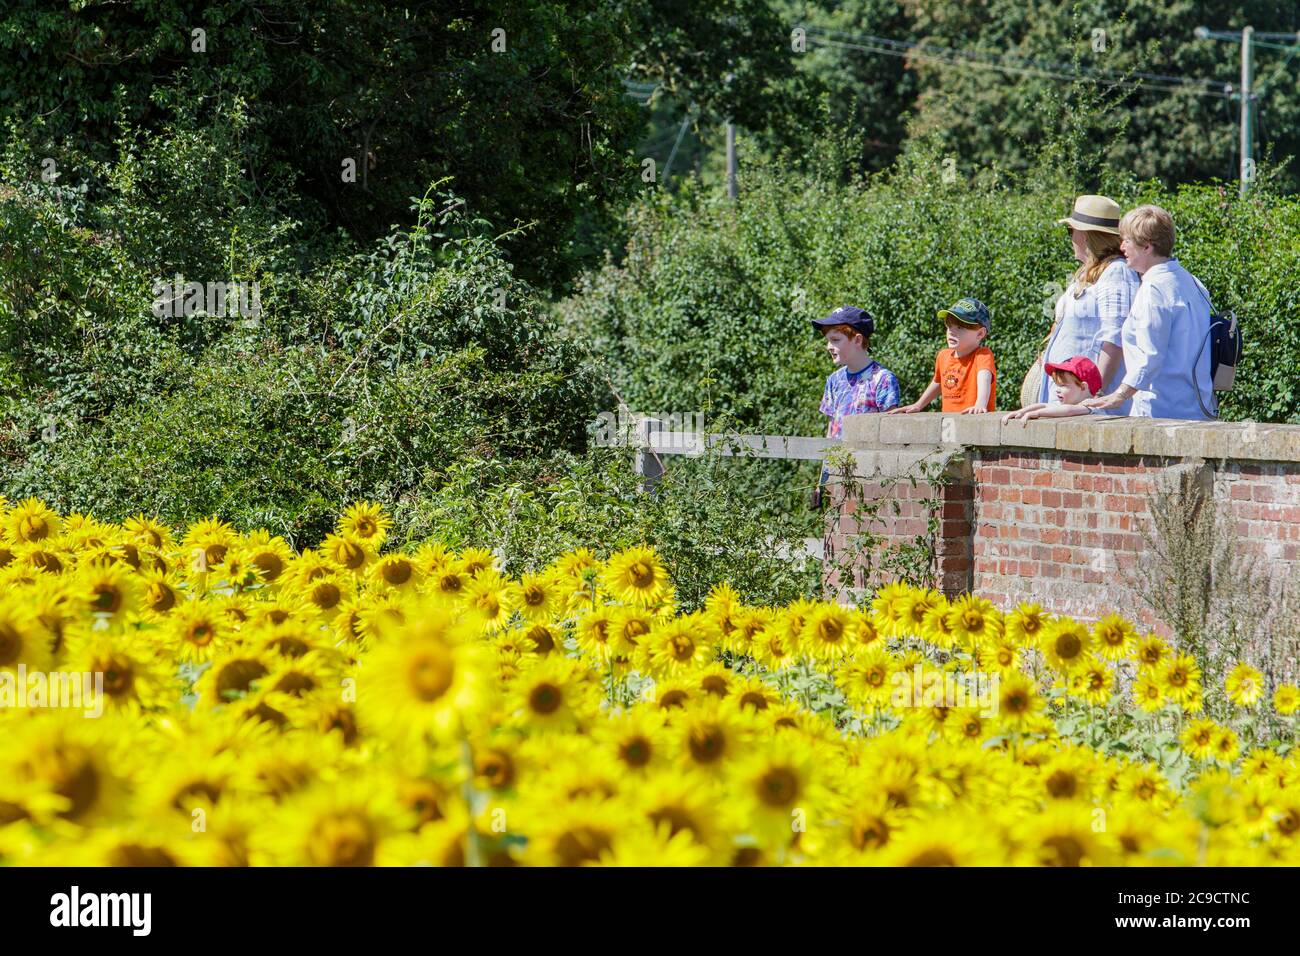 Kellaways, Wiltshire, UK. 30th July, 2020.  With many parts of the UK expecting to experience a mini heatwave during the next few days, a family enjoying the warm sunshine are pictured as they look at sunflowers growing in a field near the village of Kellaways. Credit: Lynchpics/Alamy Live News Stock Photo